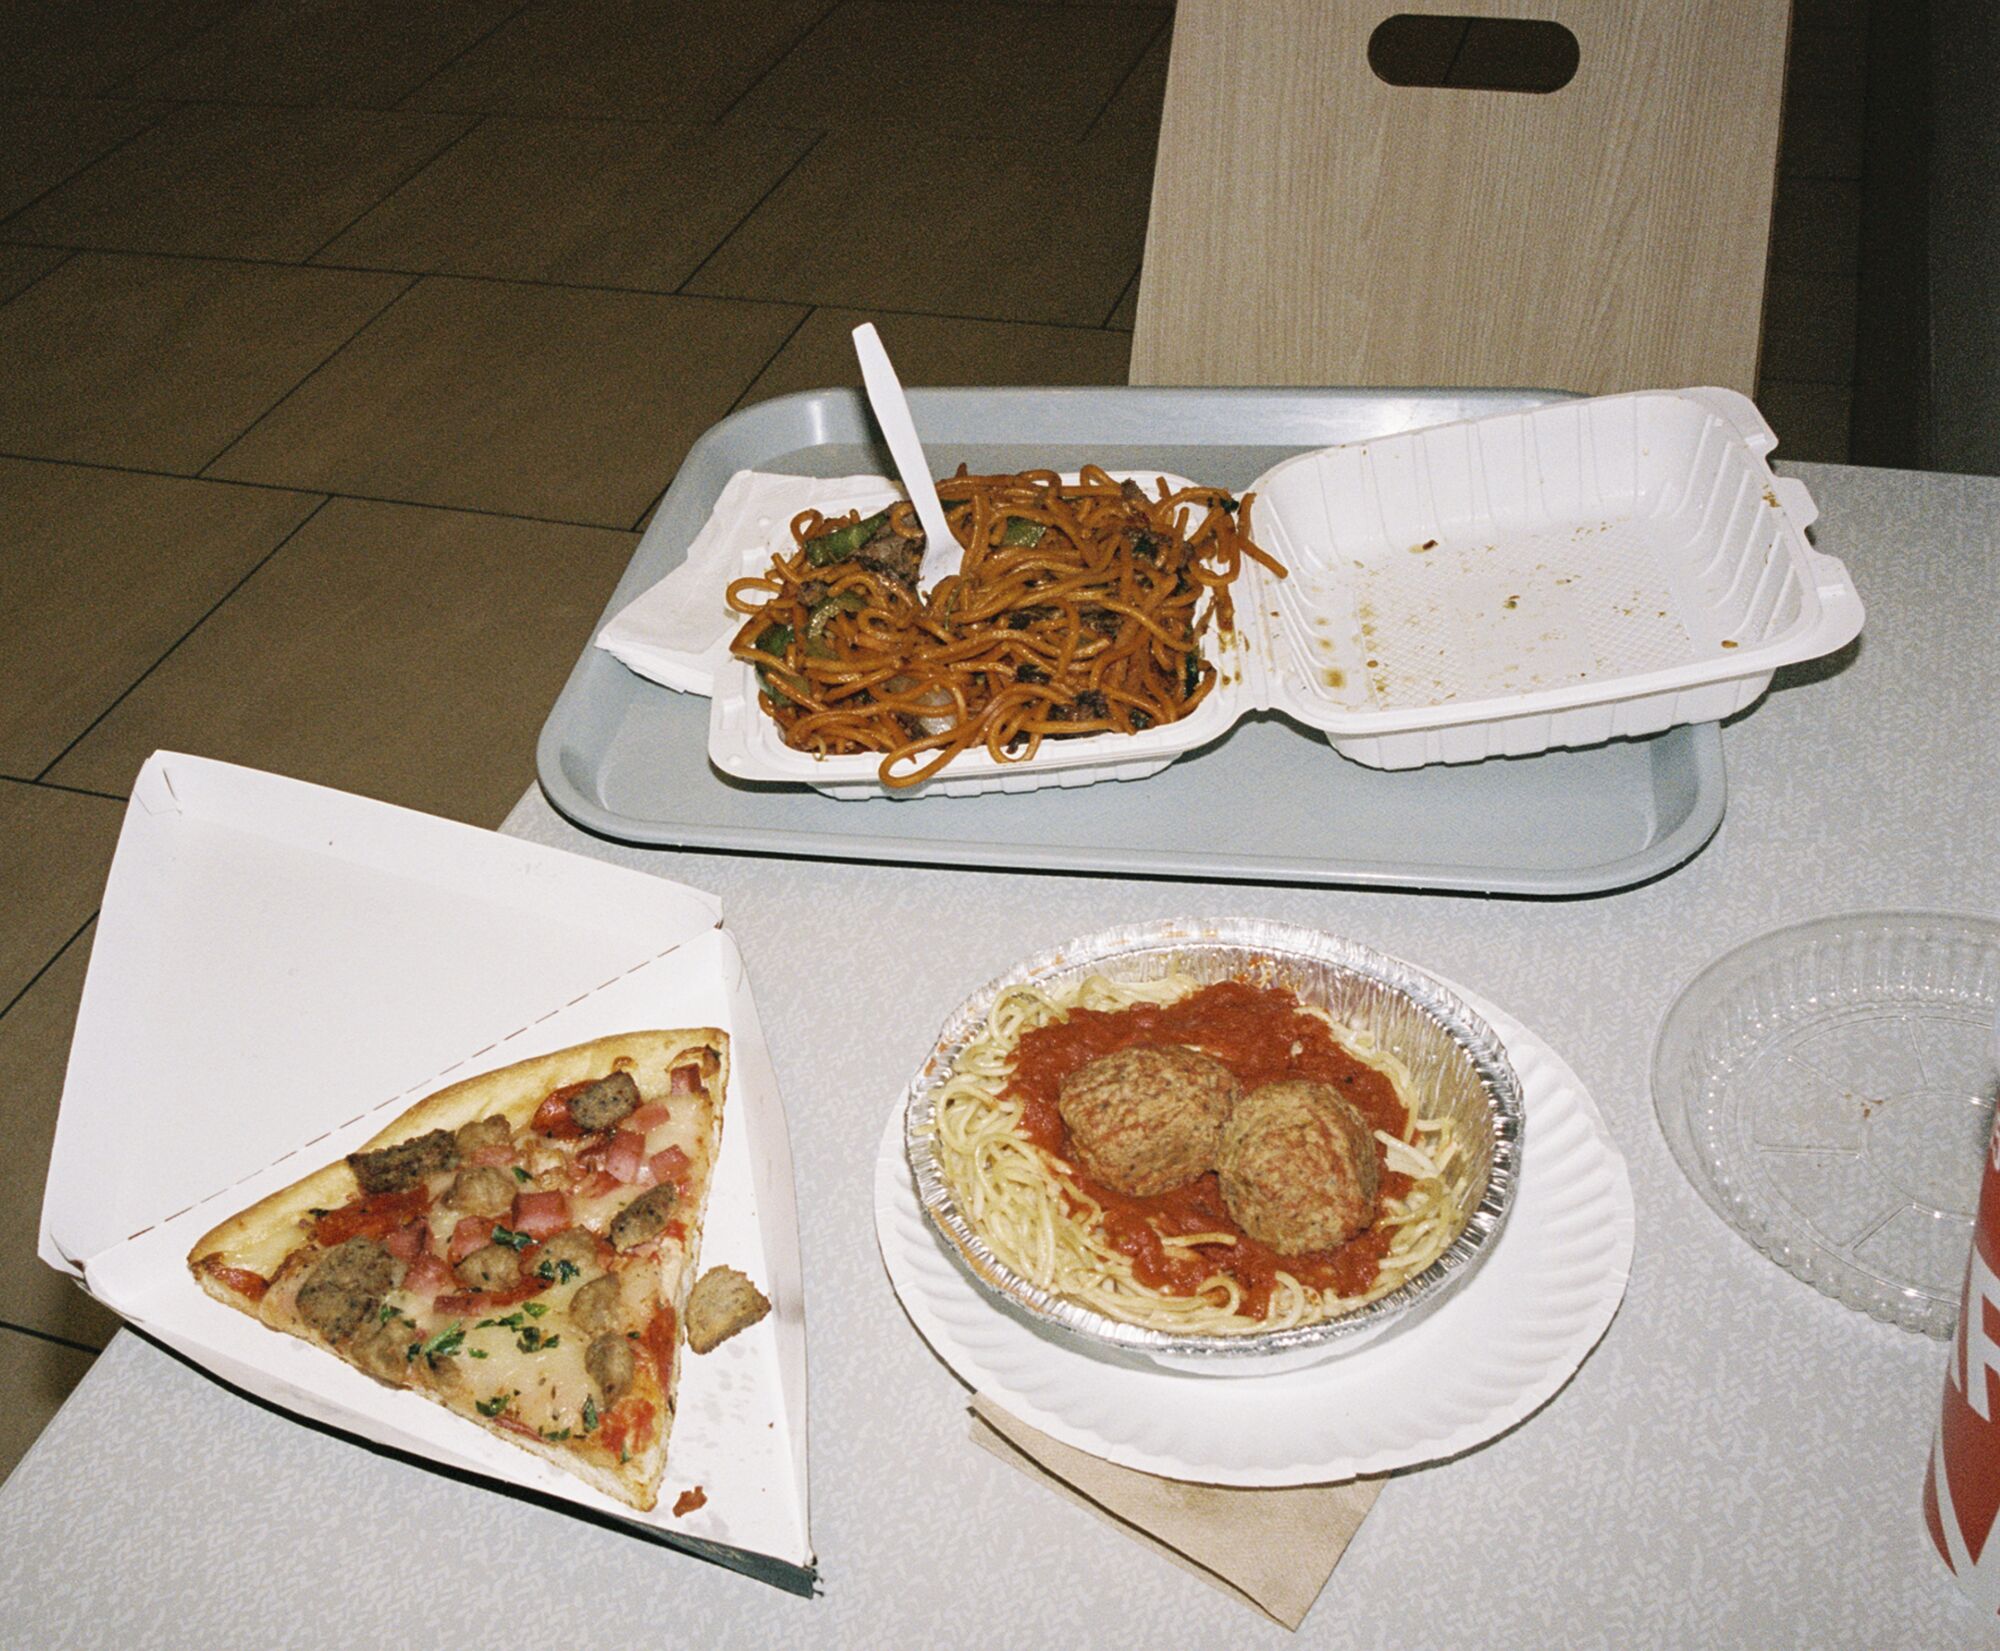 A slice of pizza, an aluminum to-go bowl of spaghetti and meatballs, and a styrofoam container filled with lo mein noodles